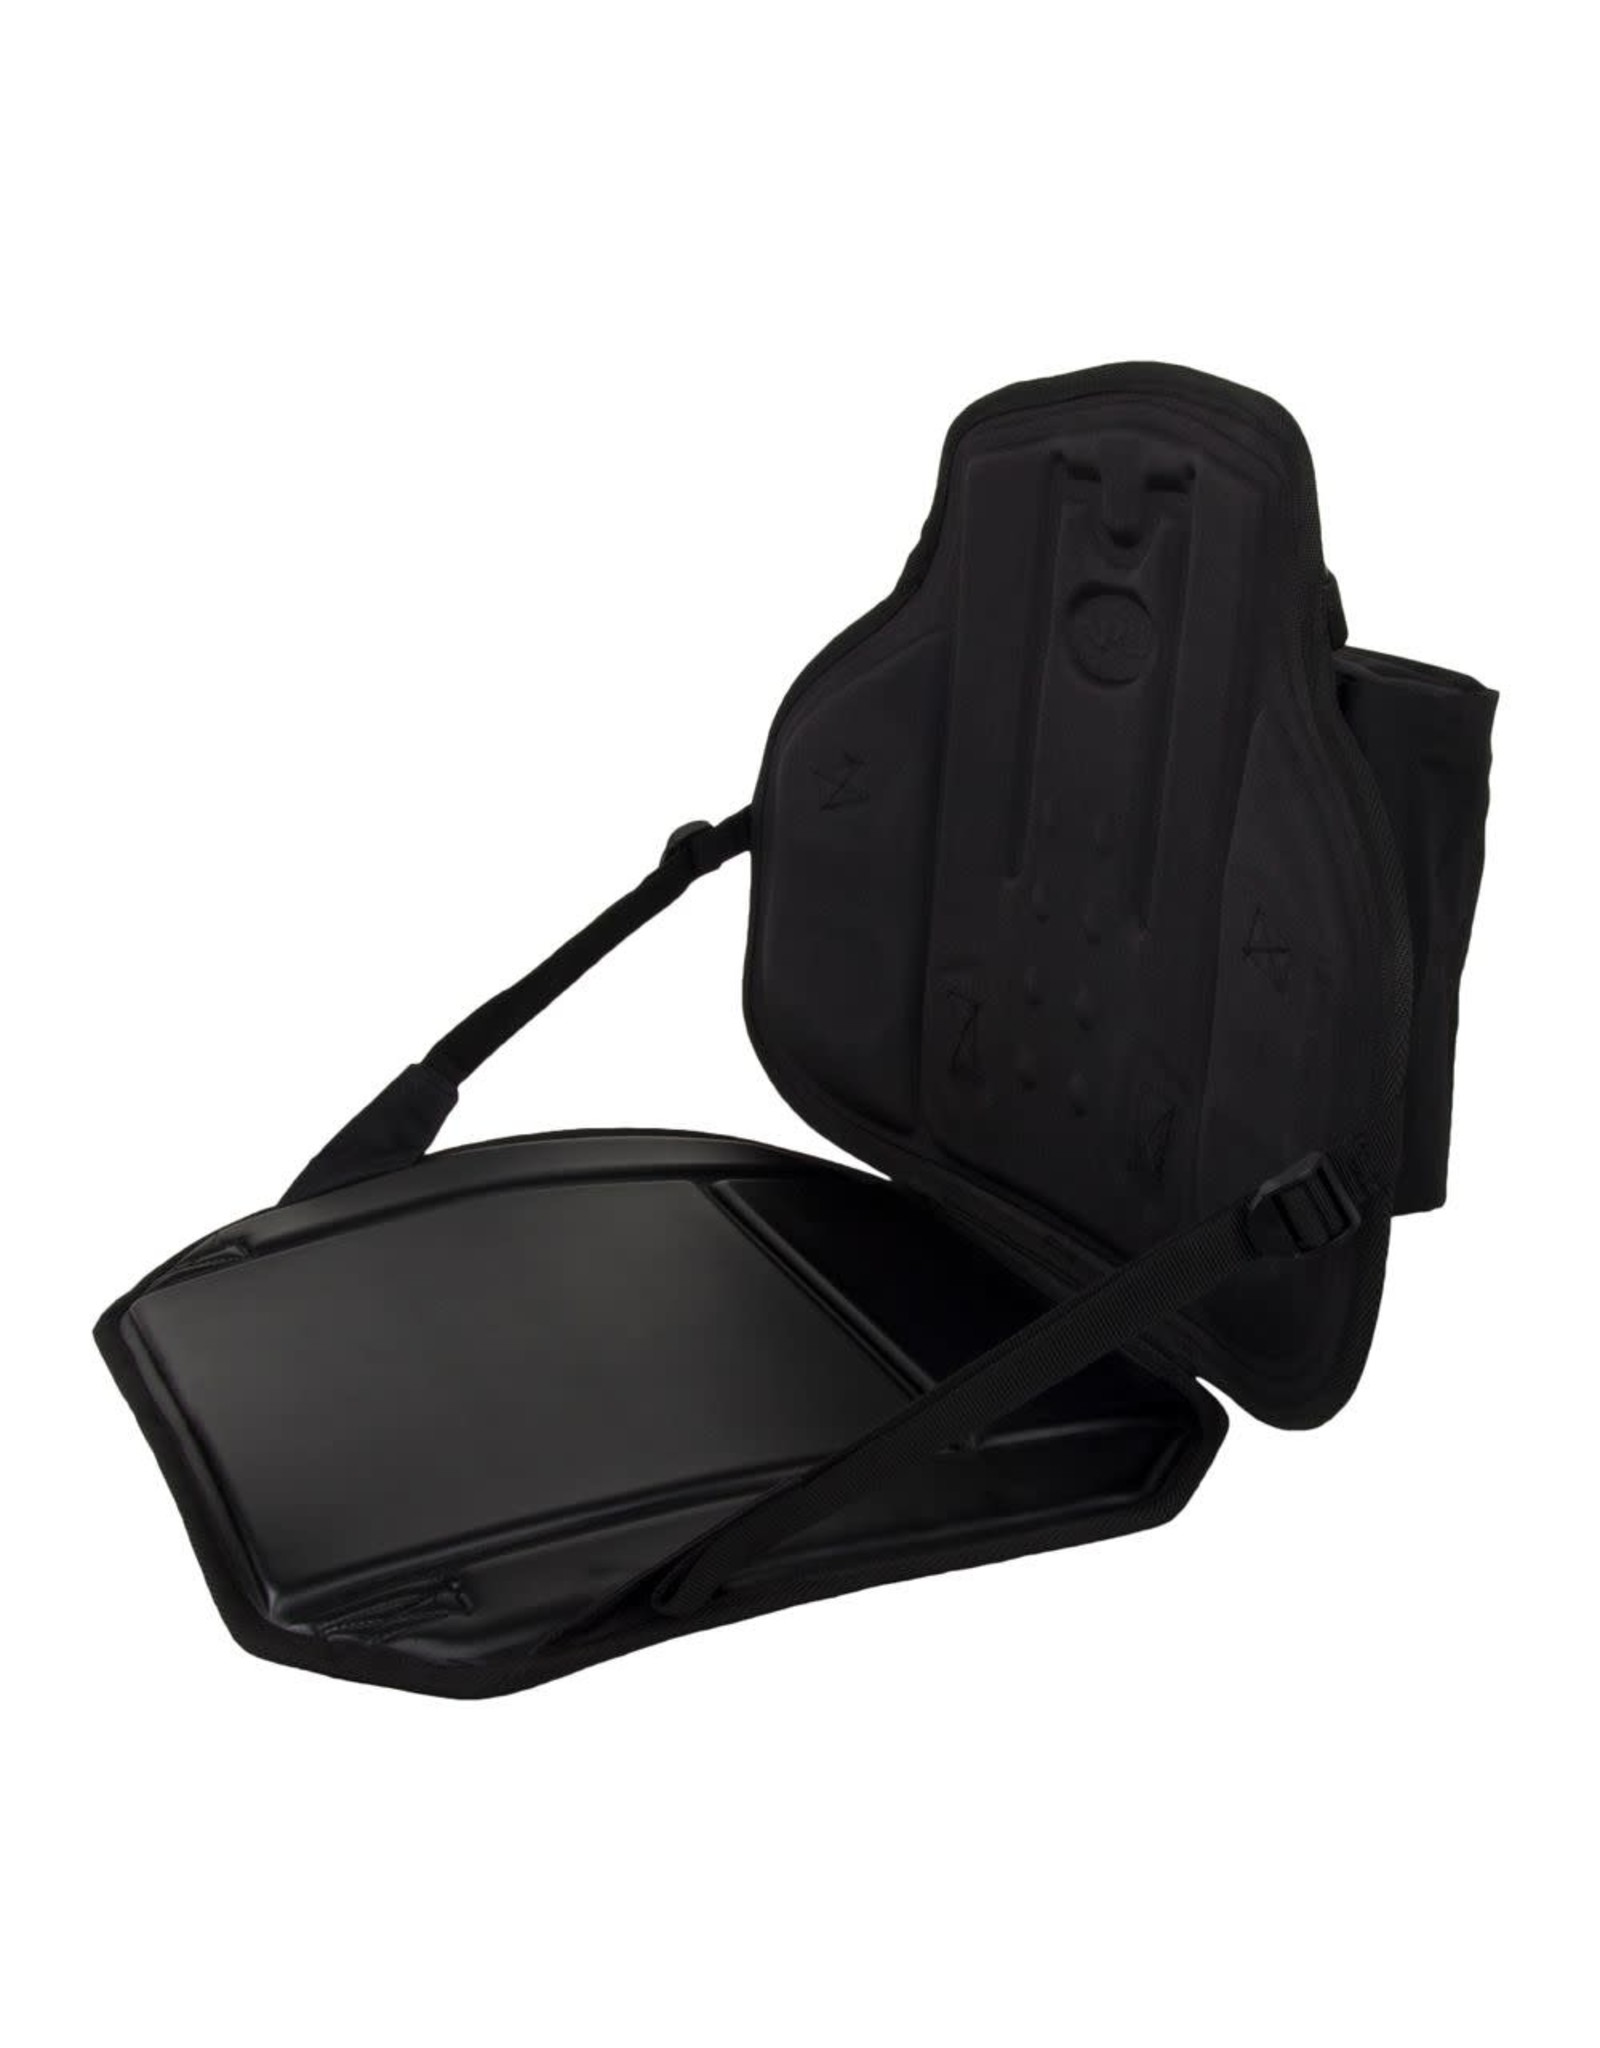 NRS NRS Pike & Gigbob Replacement Seat